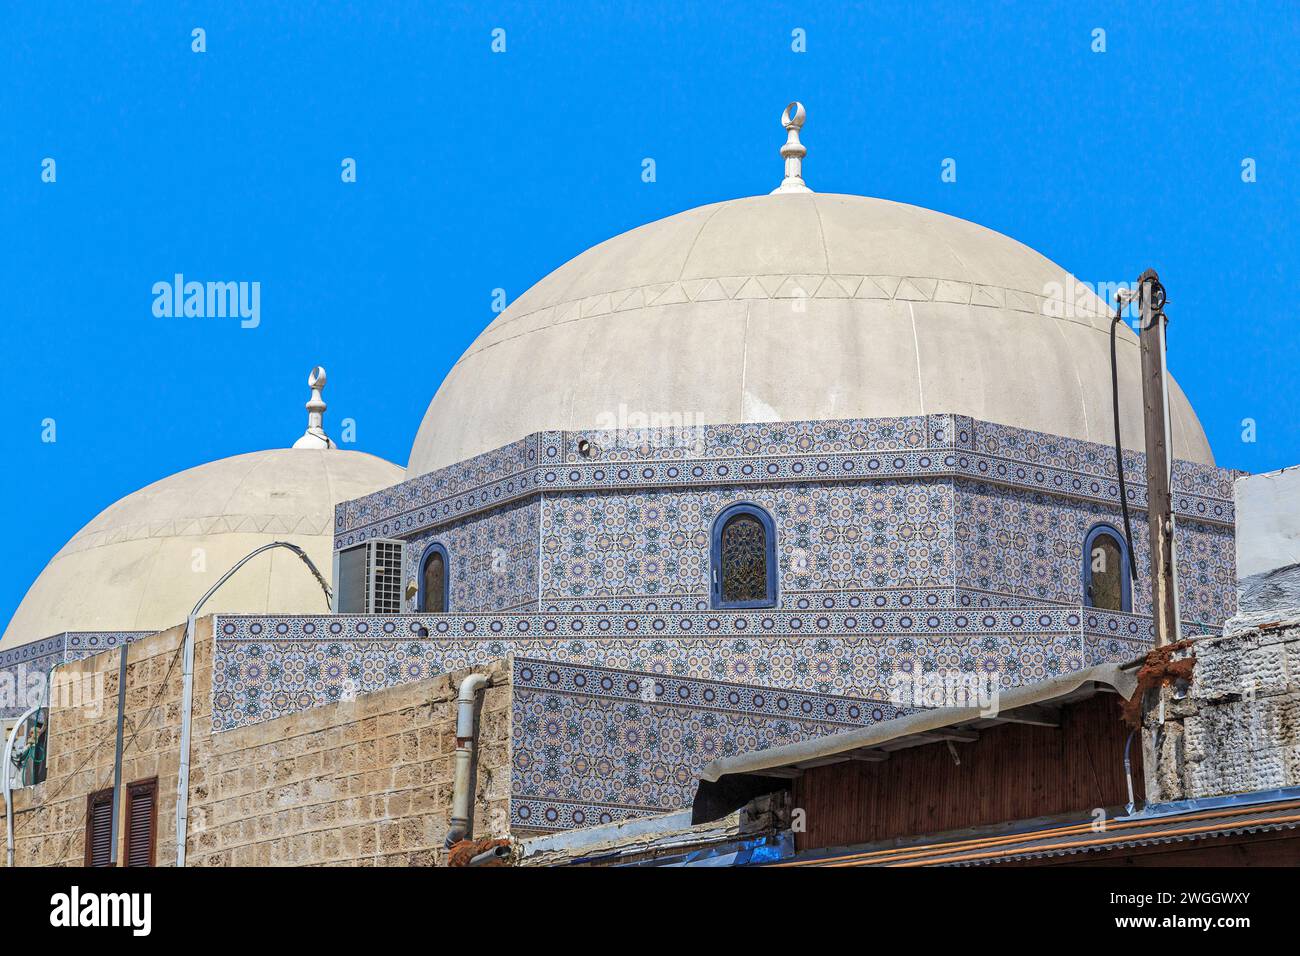 TEL AVIV, ISRAEL - SEPTEMBER 17, 2017: These are the domes of the Al Mahmudiya Mosque in Jaffa. Stock Photo